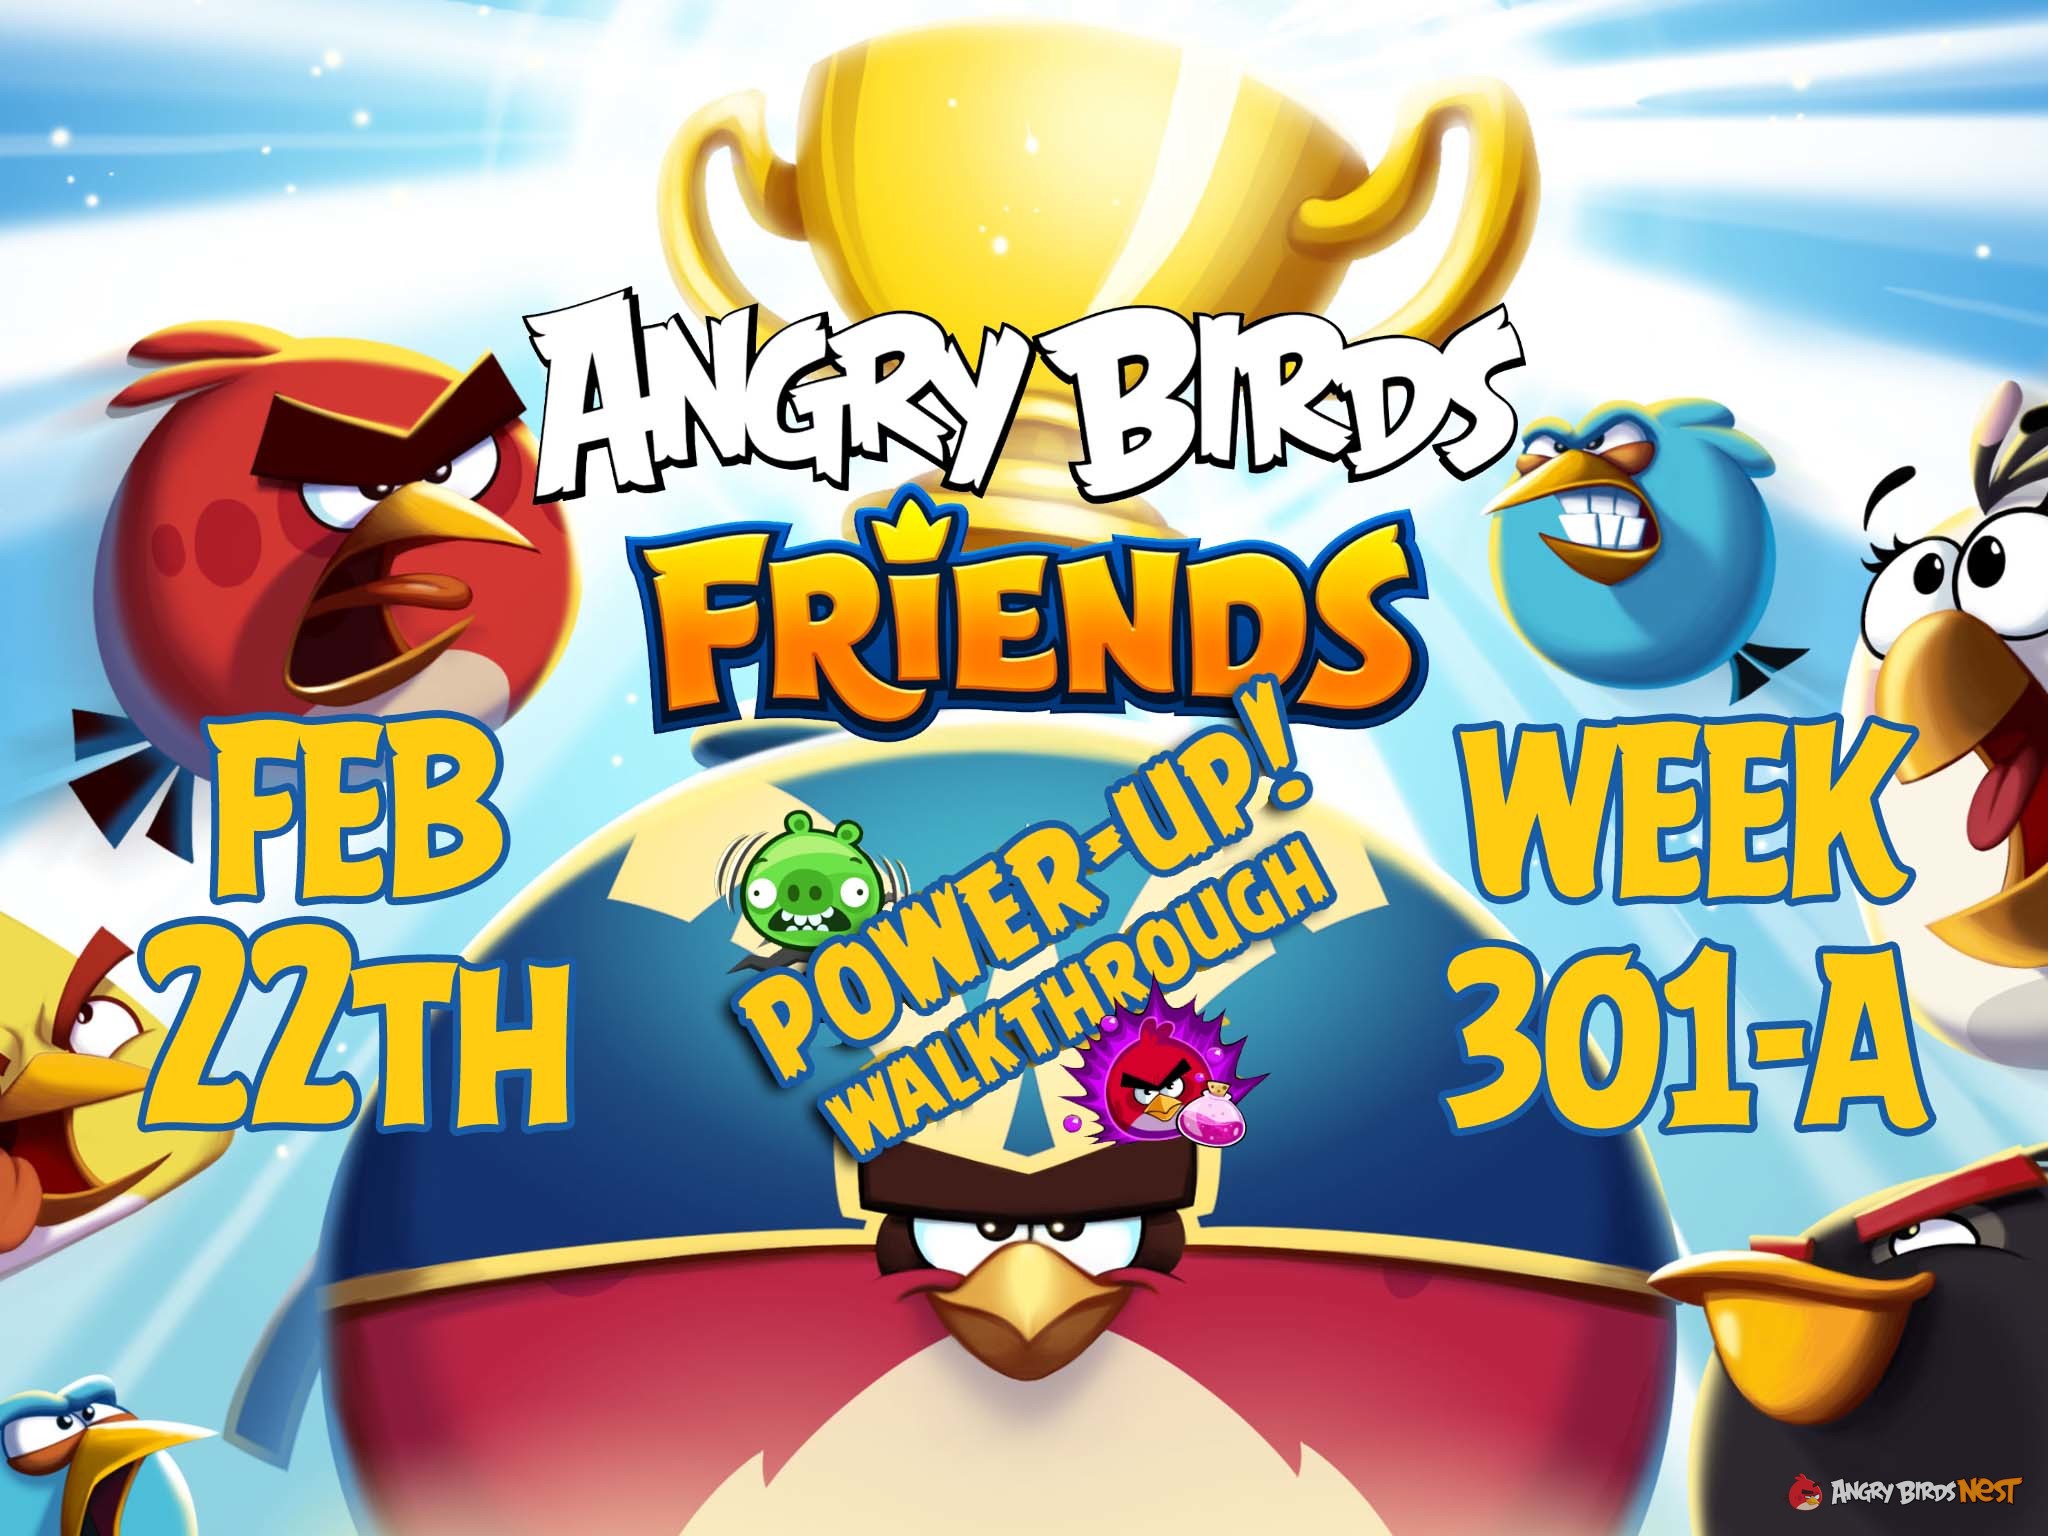 Angry Birds Friends Tournament Week 301-A Feature Image PU